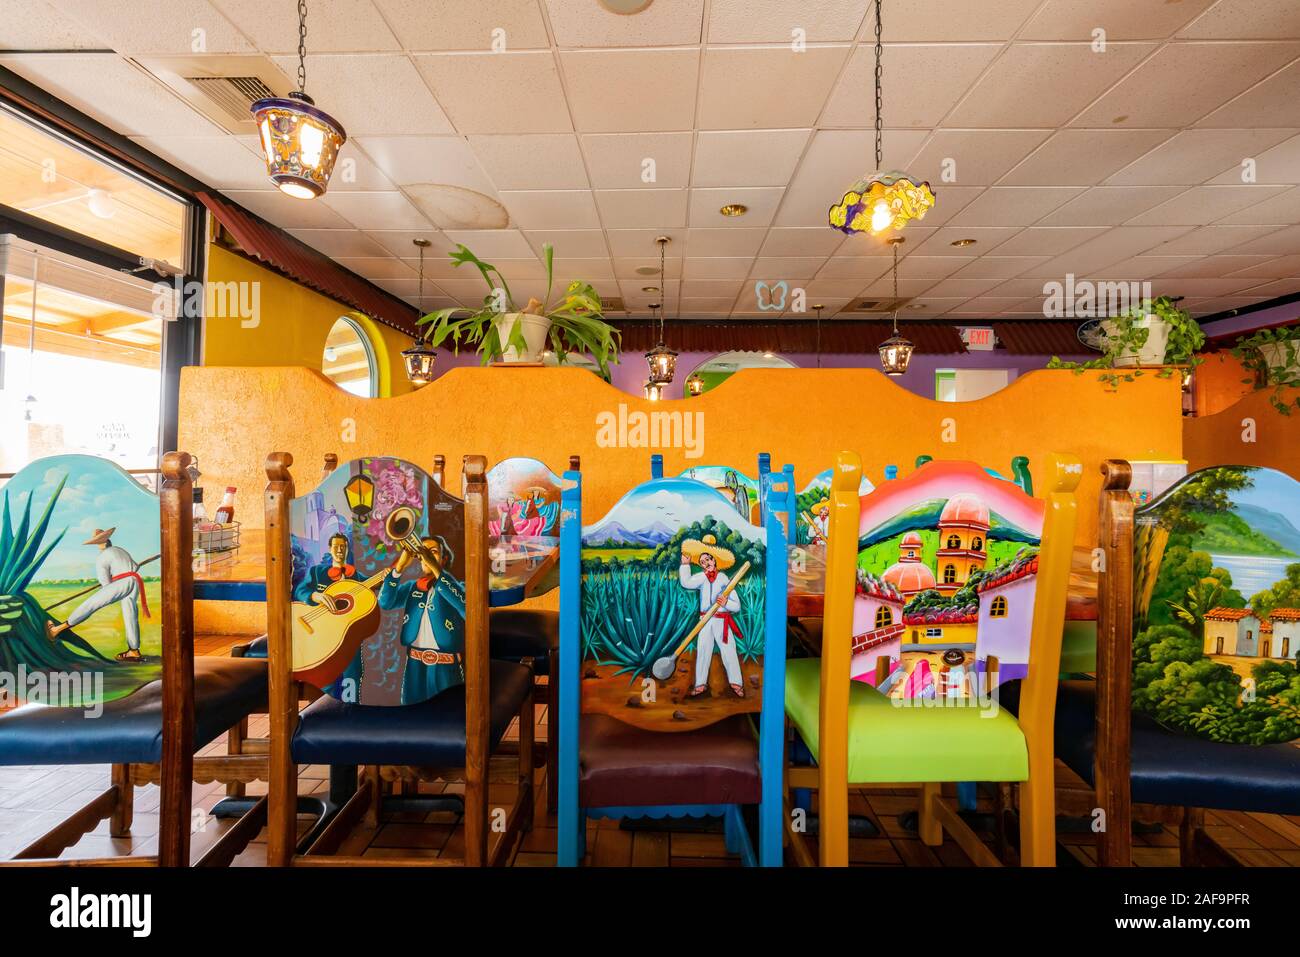 Page, AUG 13: Interior view of a Mexican style restaurant on AUG 13, 2018 at Page, Arizona Stock Photo